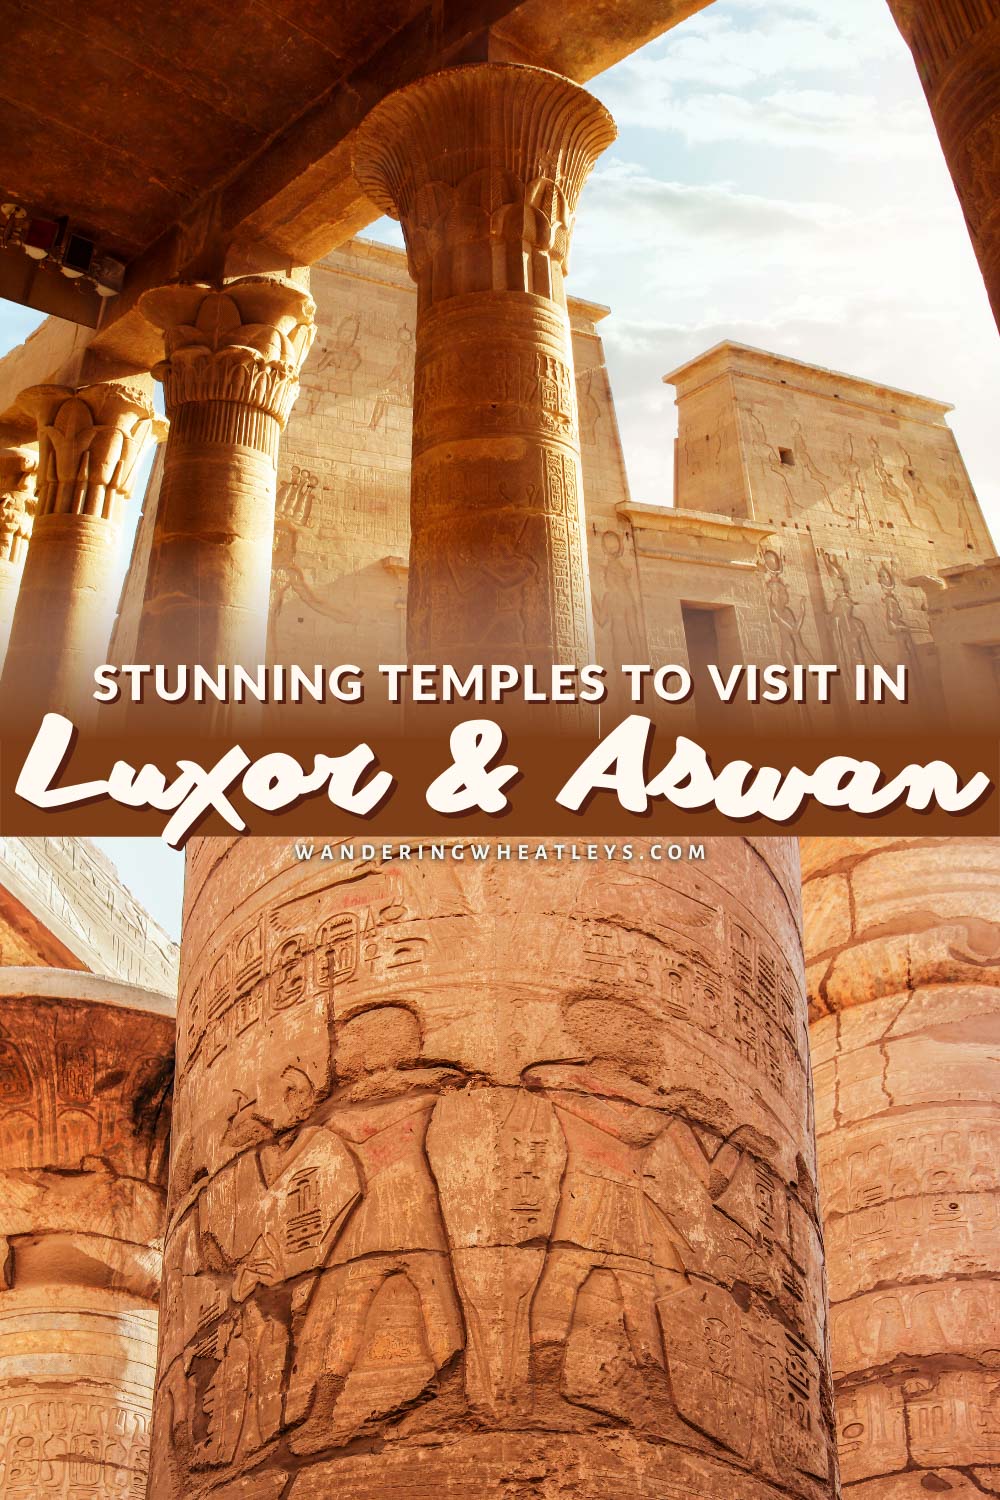 The Best Temples to Visit in Luxor and Aswan, Egypt